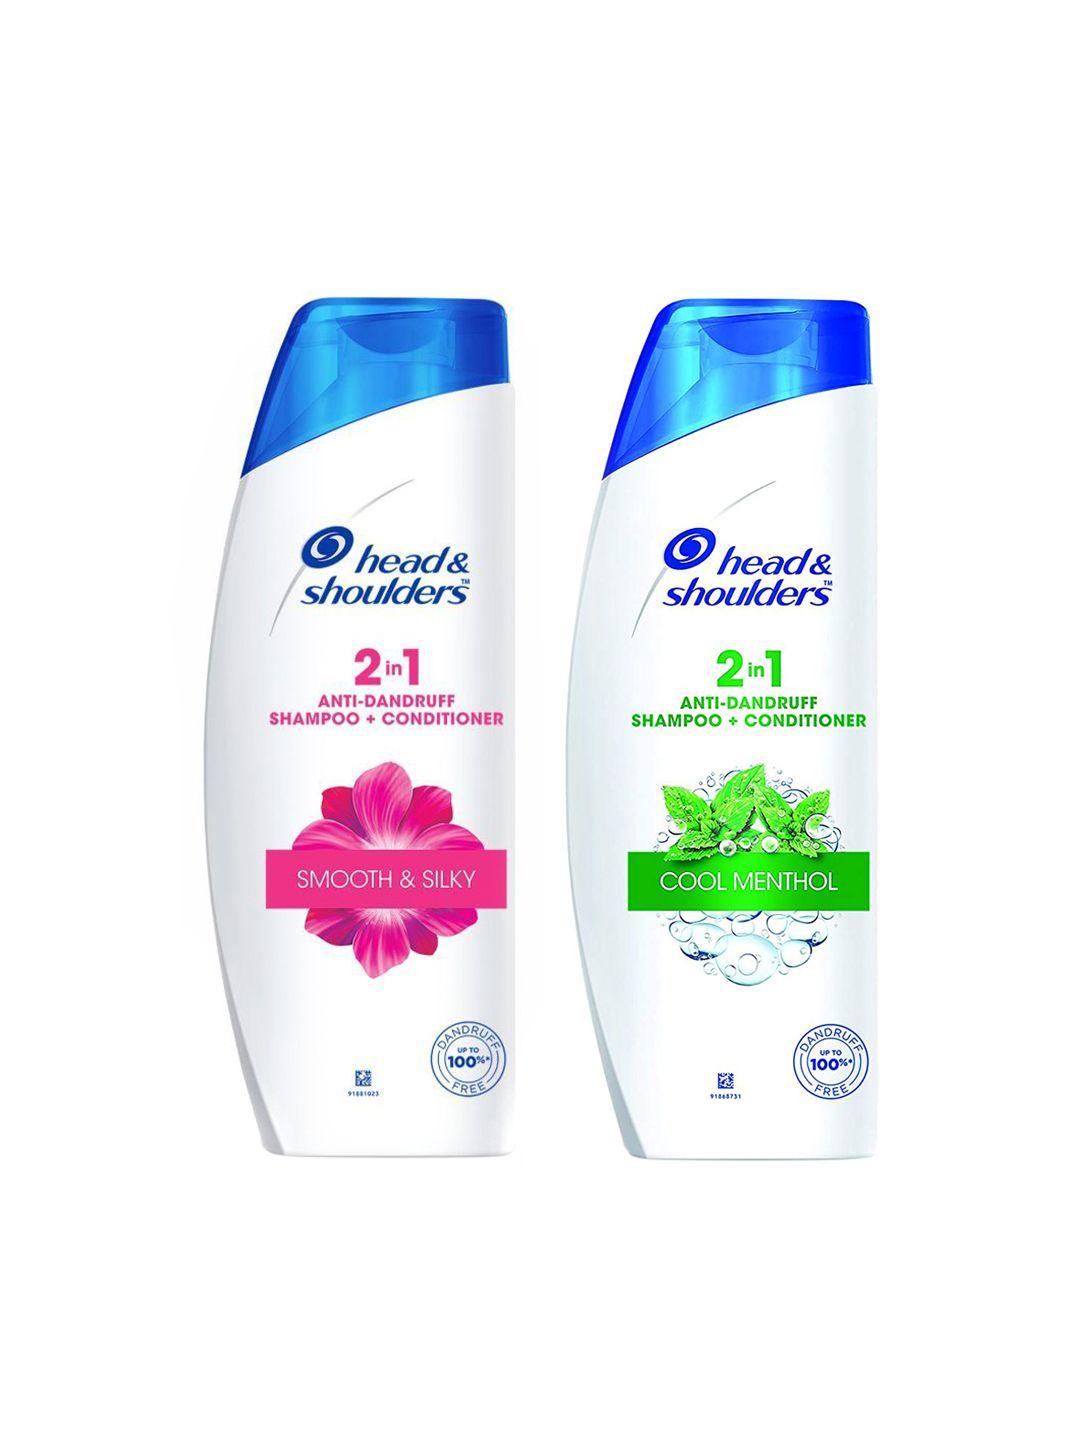 head & shoulders set of 2 cool menthol & smooth & silky 2 in 1 shampoo & conditioner